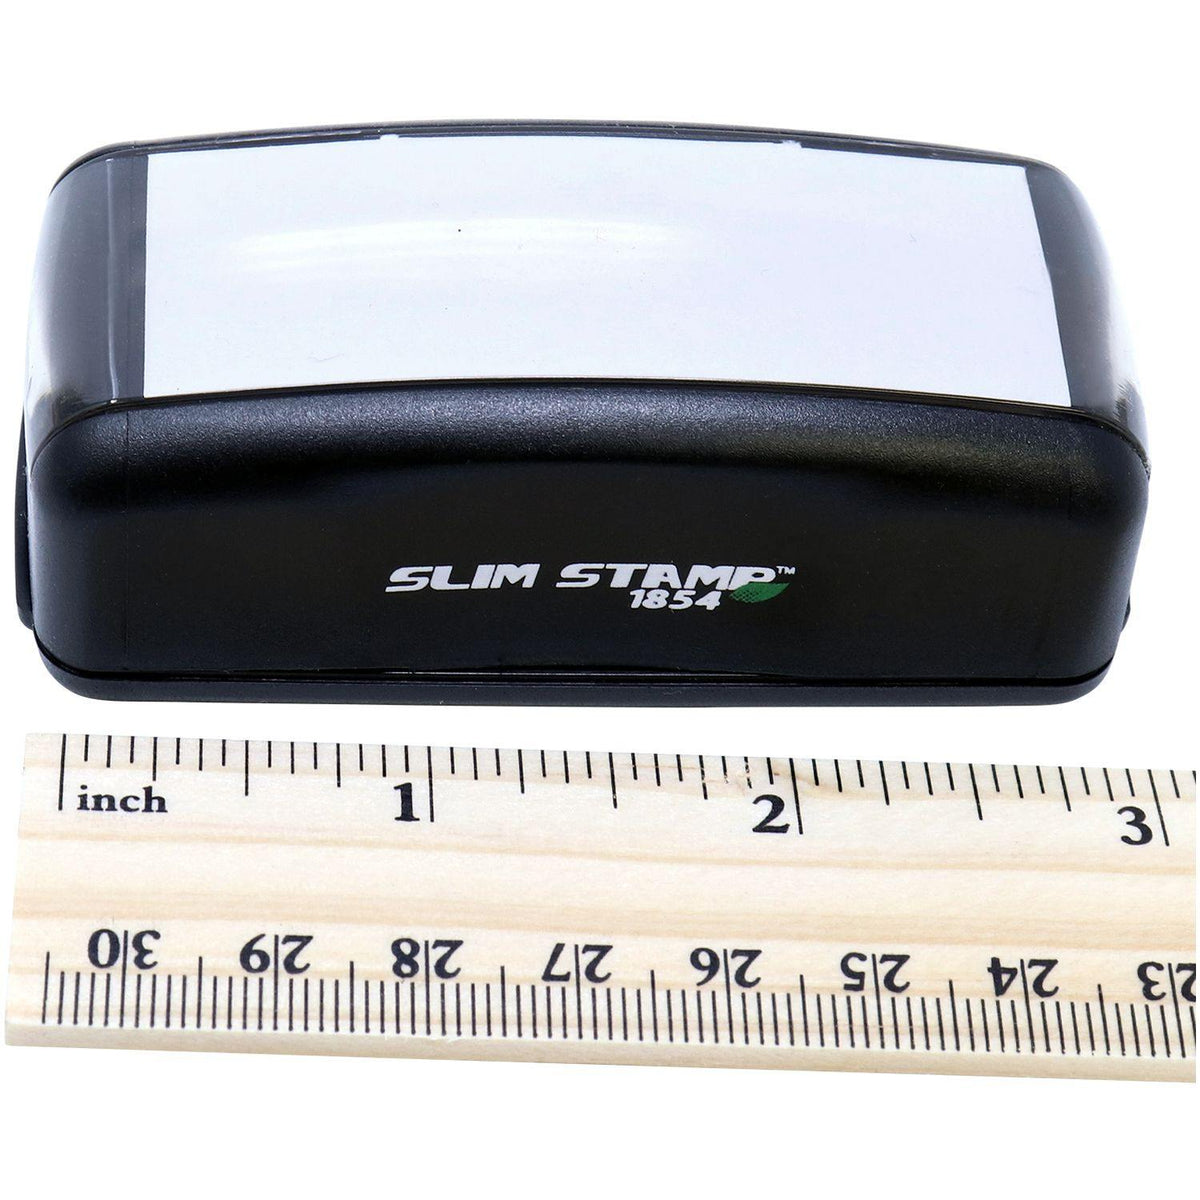 Measurement Large Pre-Inked Classified Stamp with Ruler